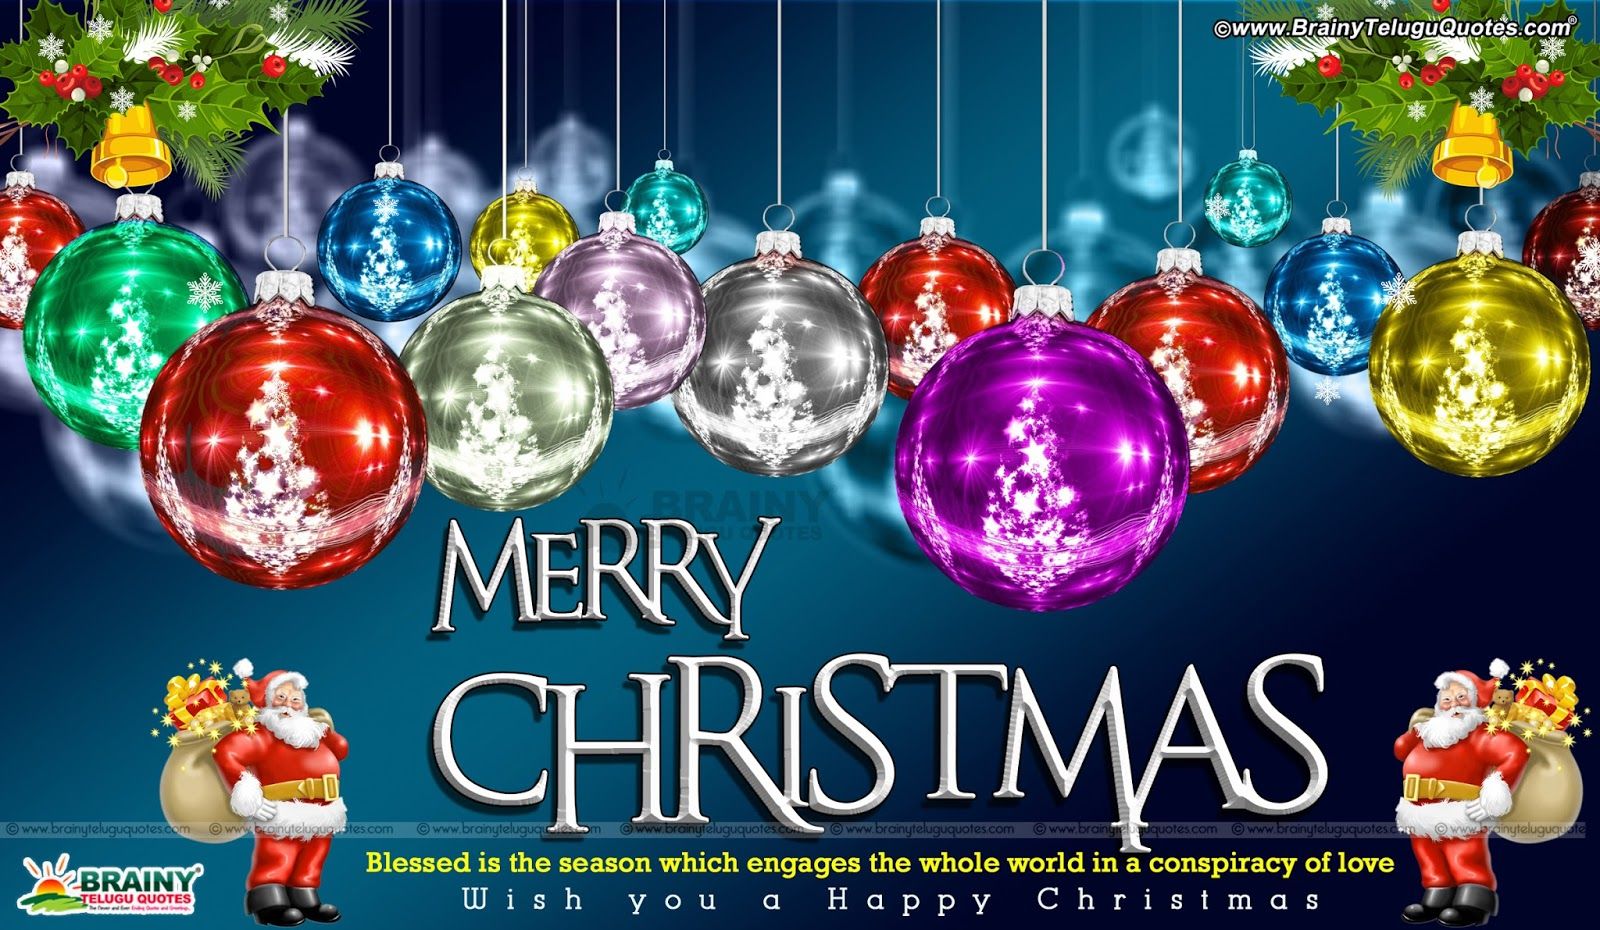 Merry Christmas Greetings With Inspirational Messages Christmas Wallpaper HD. BrainyTeluguQuotes.comTelugu Quotes. English Quotes. Hindi Quotes. Tamil Quotes. Greetings